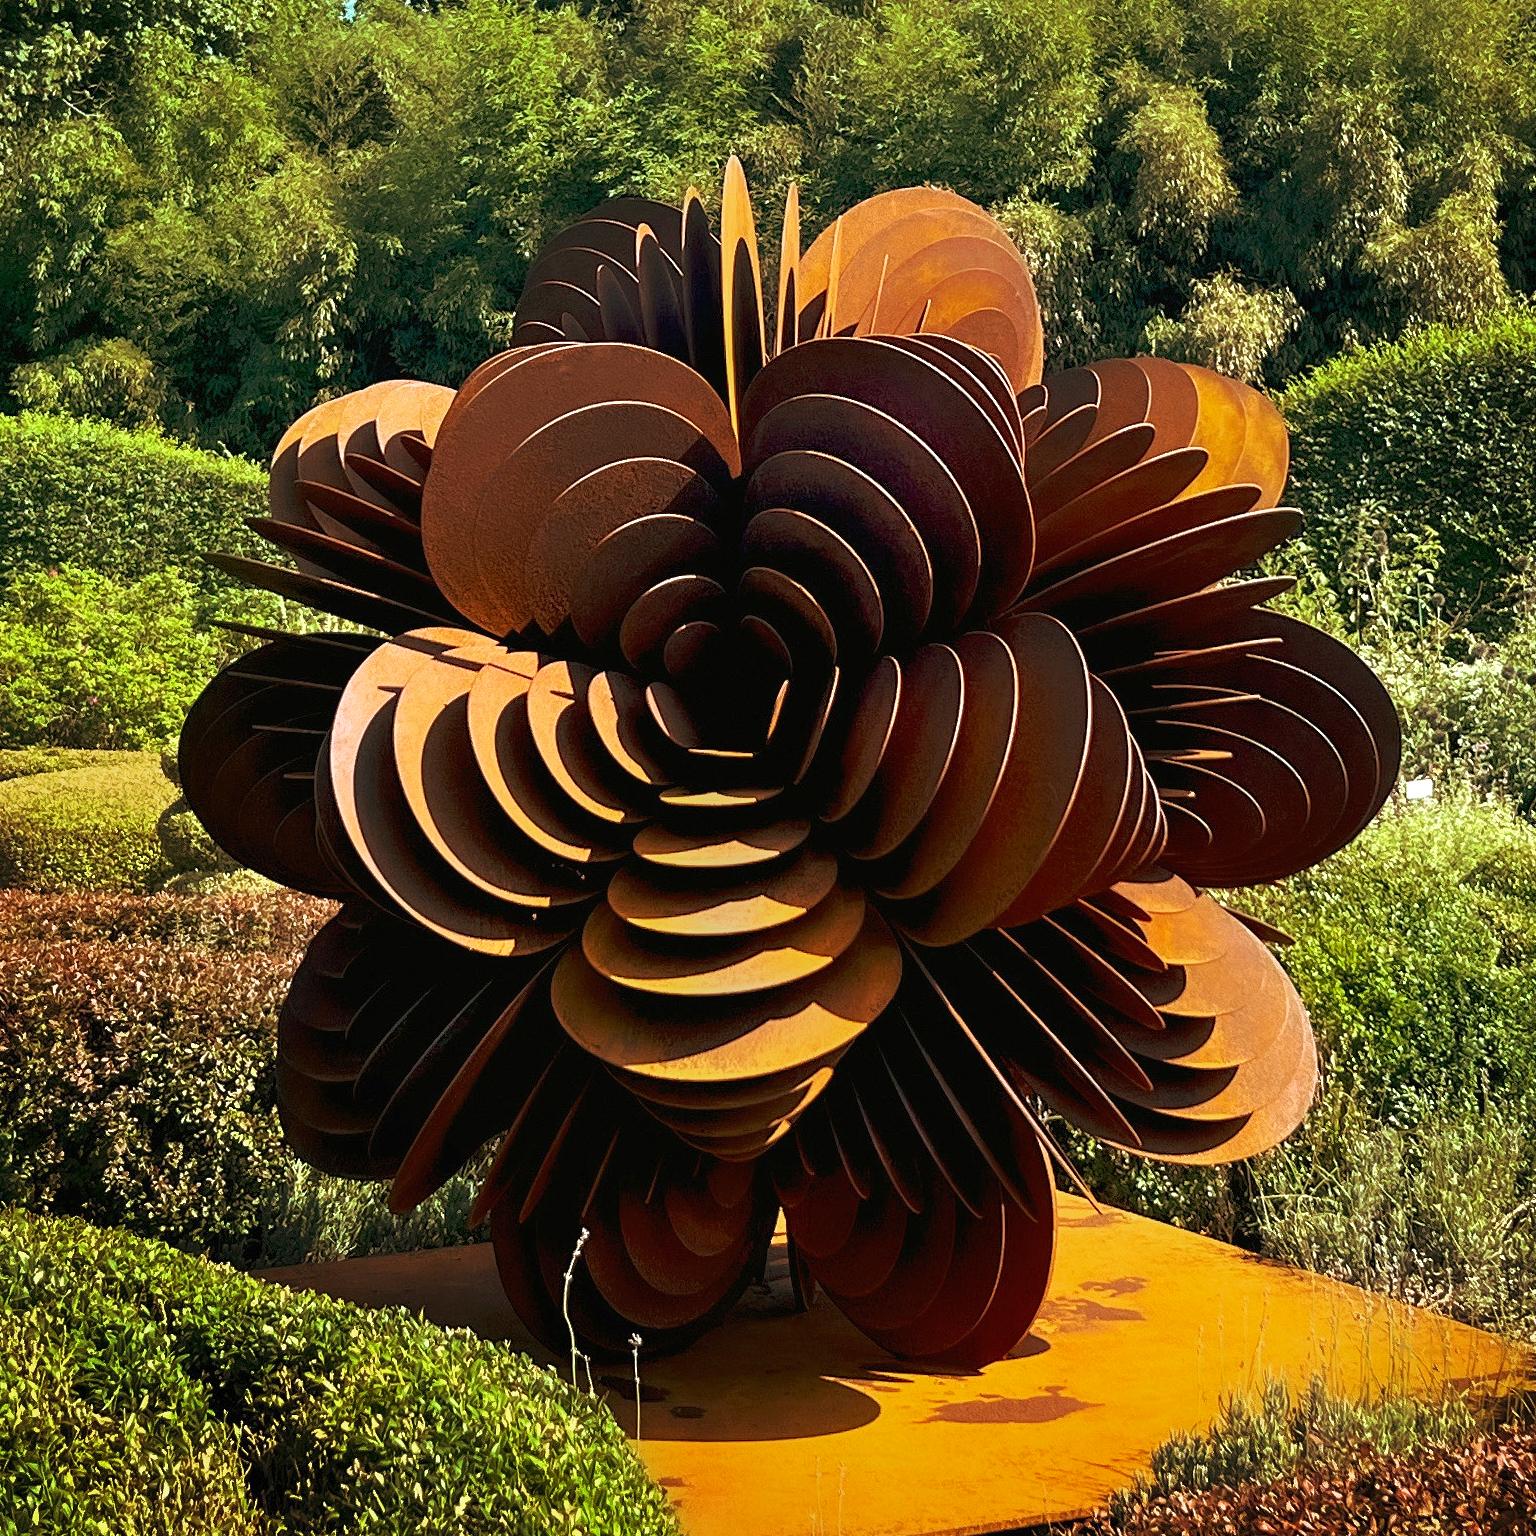 Norman Mooney Abstract Sculpture - "Bloom No. 3" from the Bloom Series, Abstract, Organic Sculpture in Steel